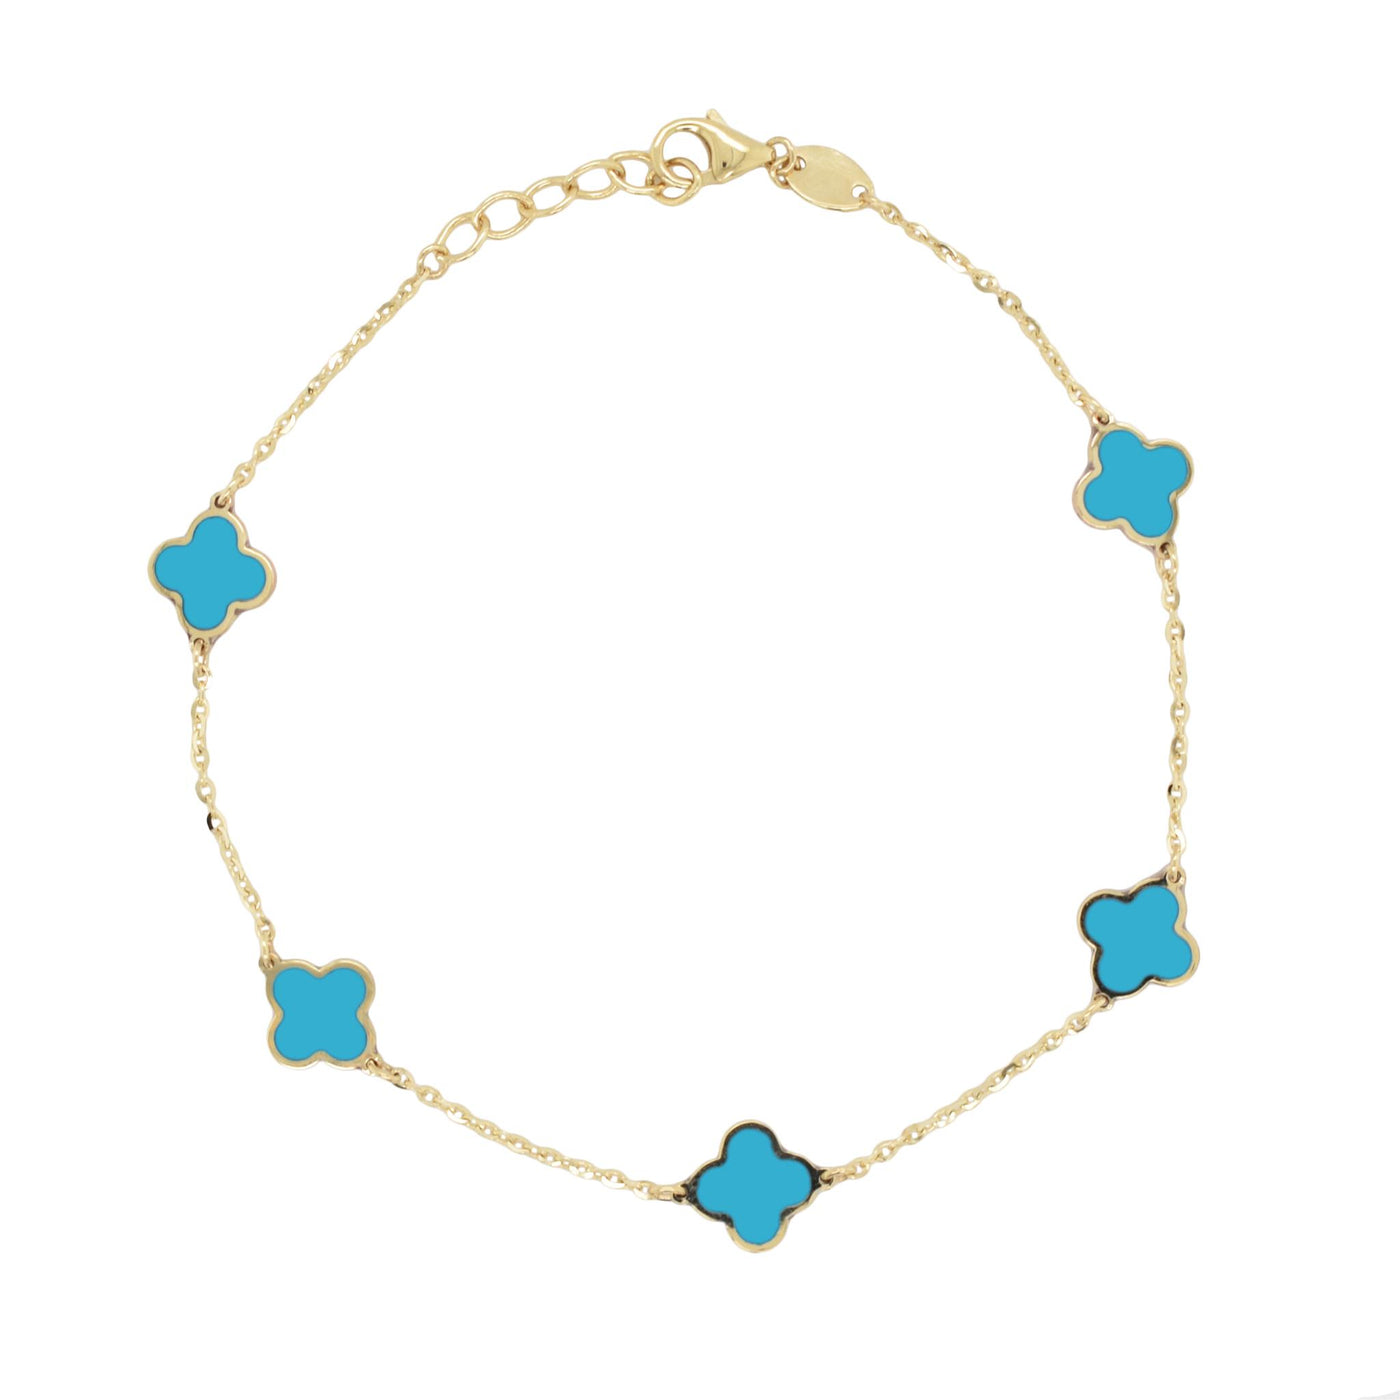 14K Yellow Gold 7" Clover Station Style Bracelet Featuring Turquoise